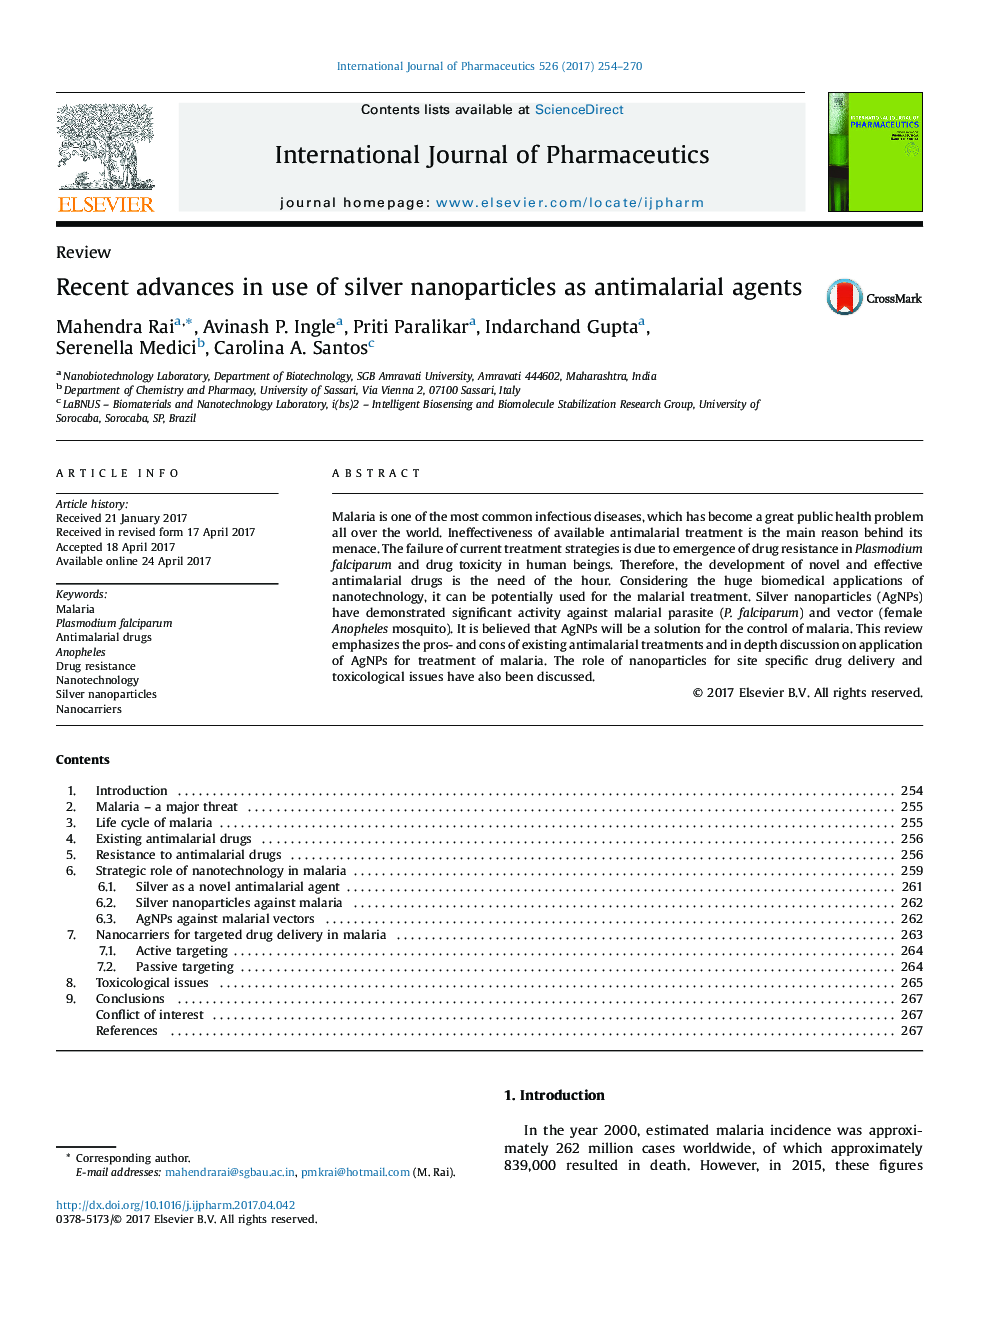 Recent advances in use of silver nanoparticles as antimalarial agents